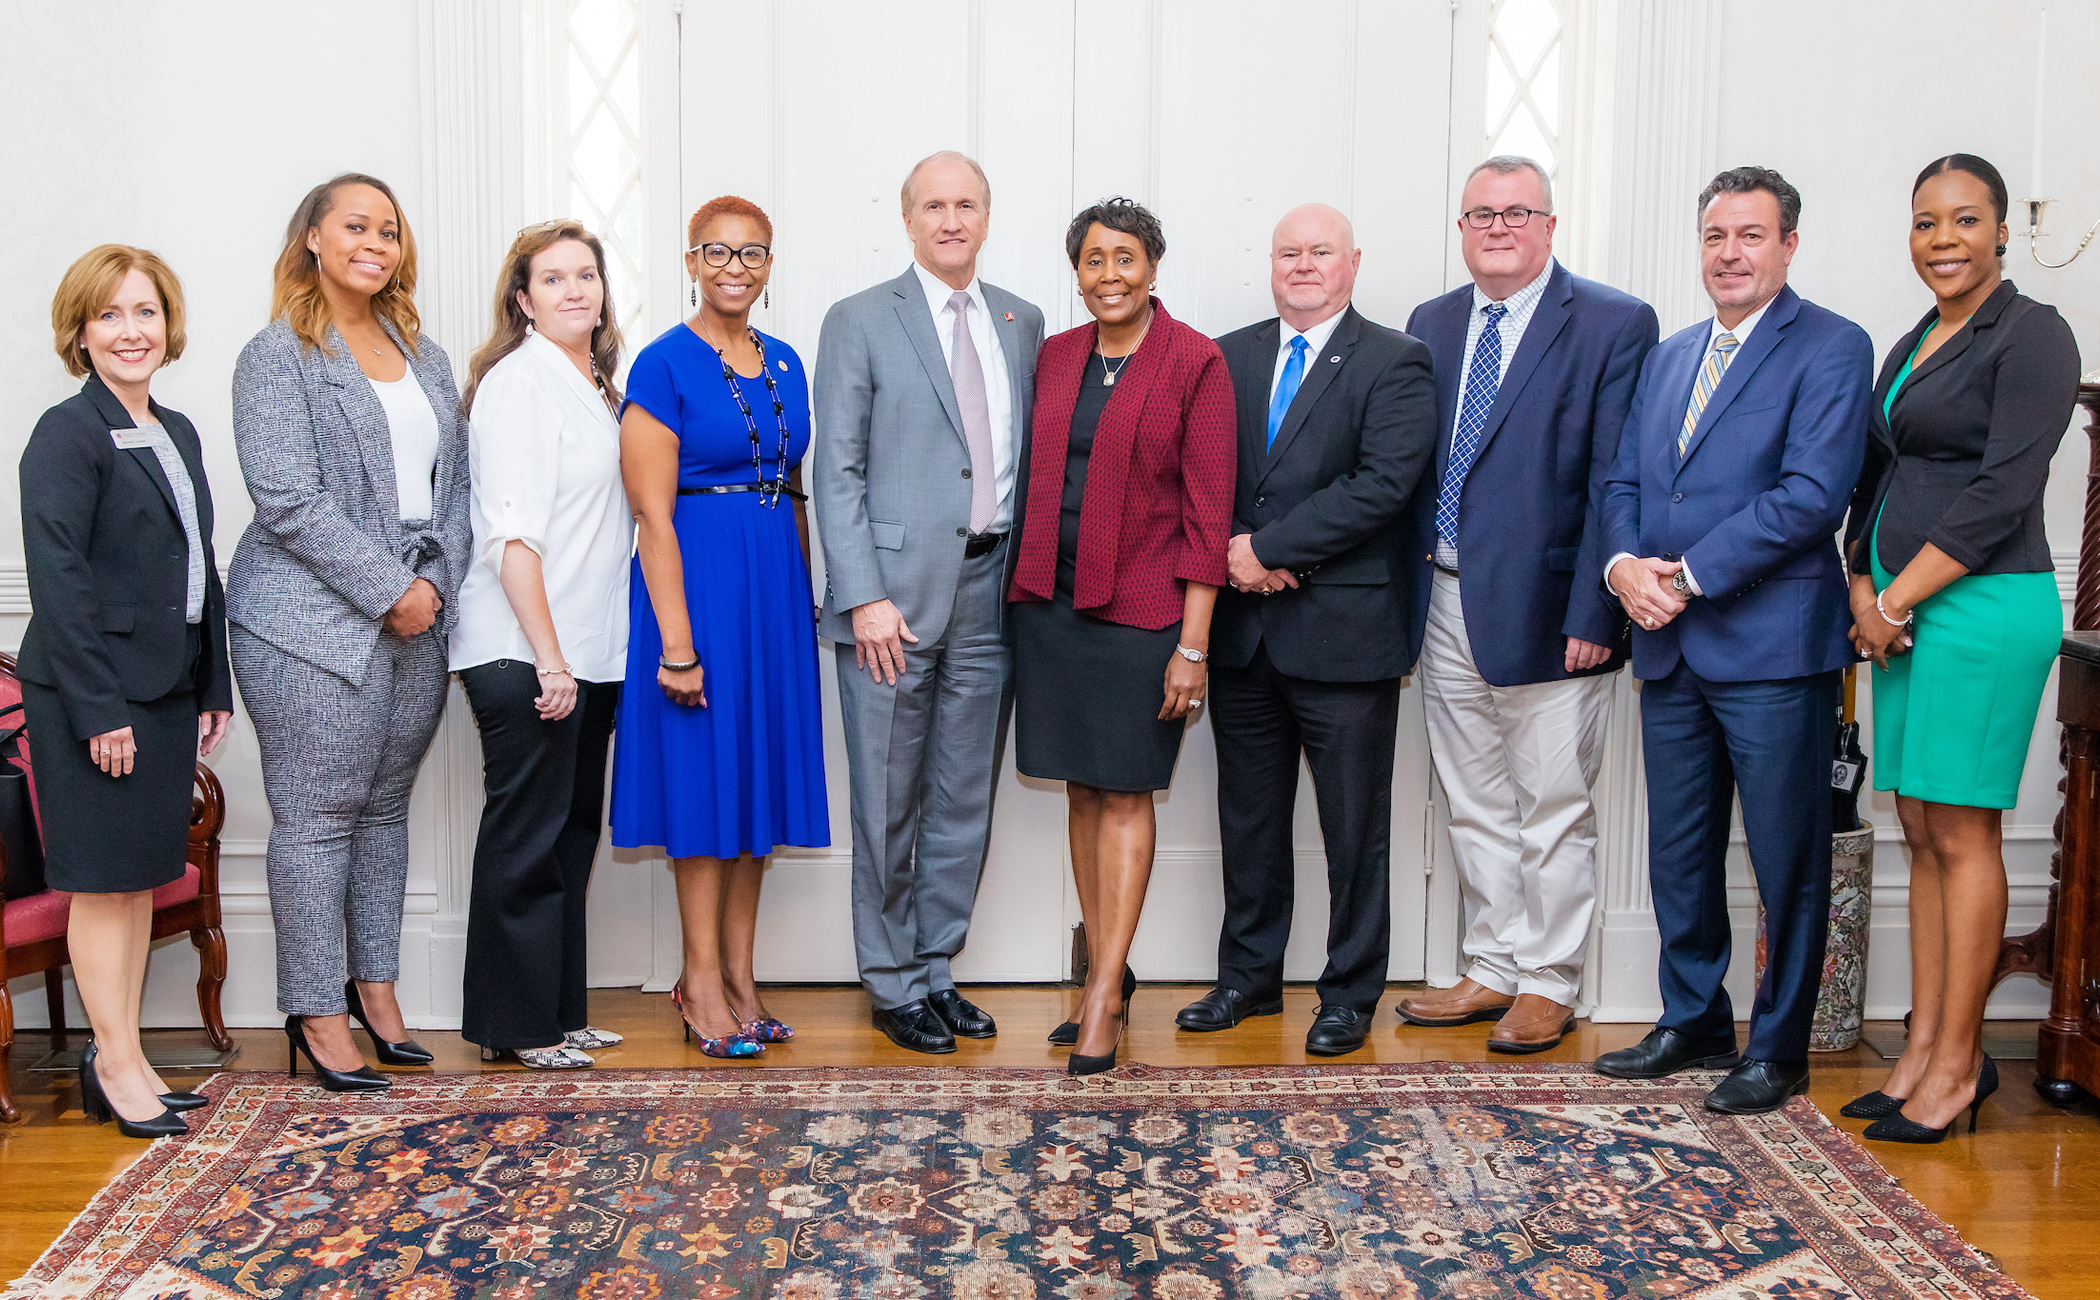 President Stuart Bell and community college leaders during the event at the President's Mansion